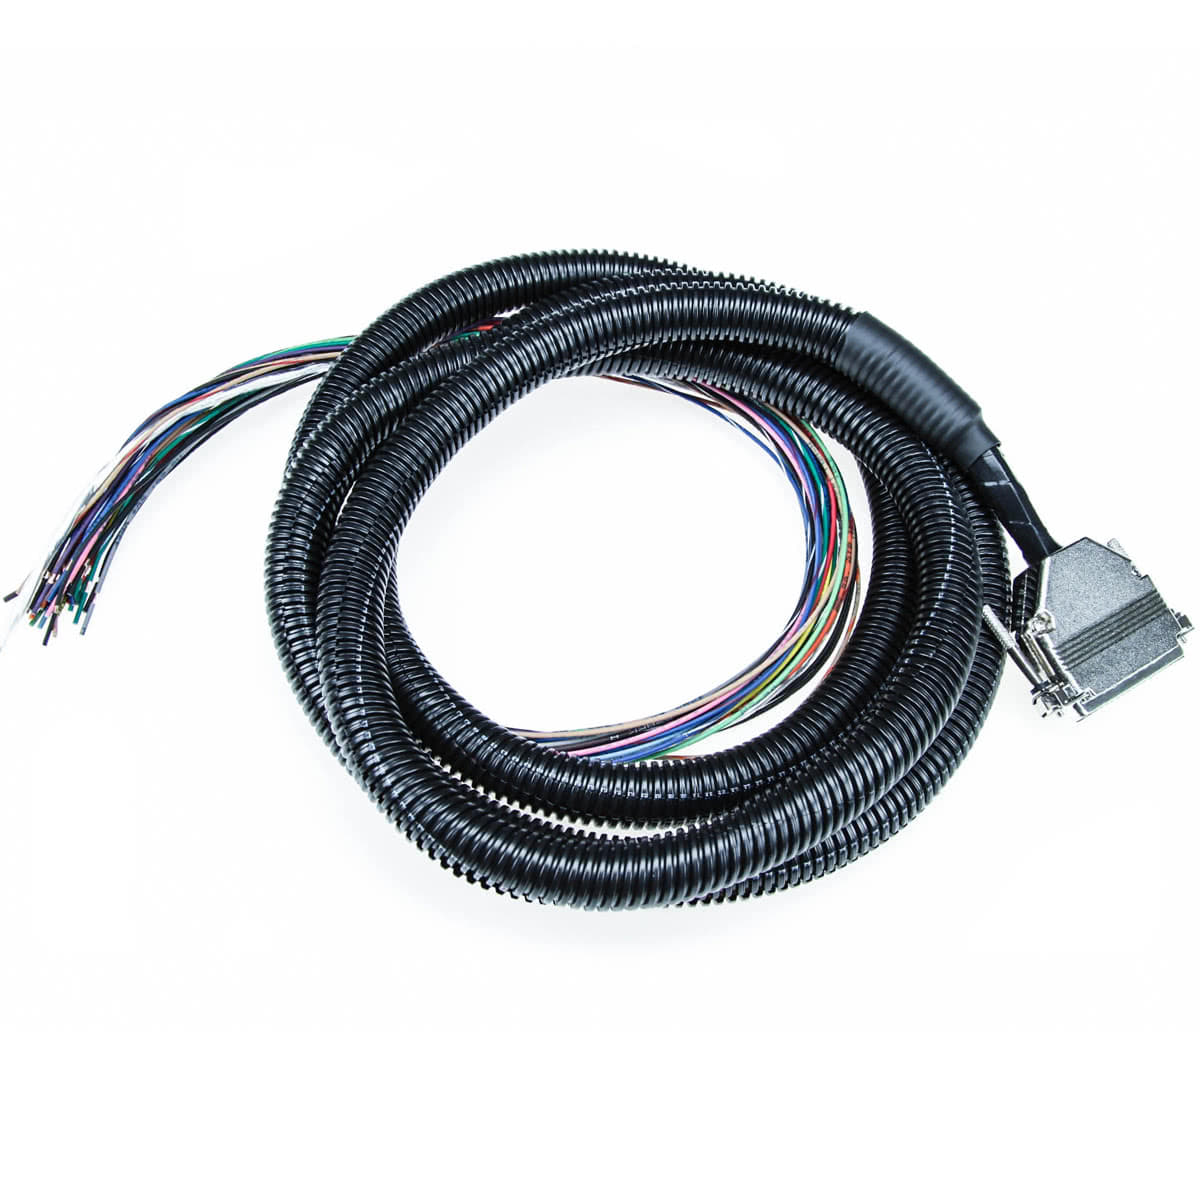 8' MegaSquirt Wiring Harness (MS1/MS2/MS3 Ready)